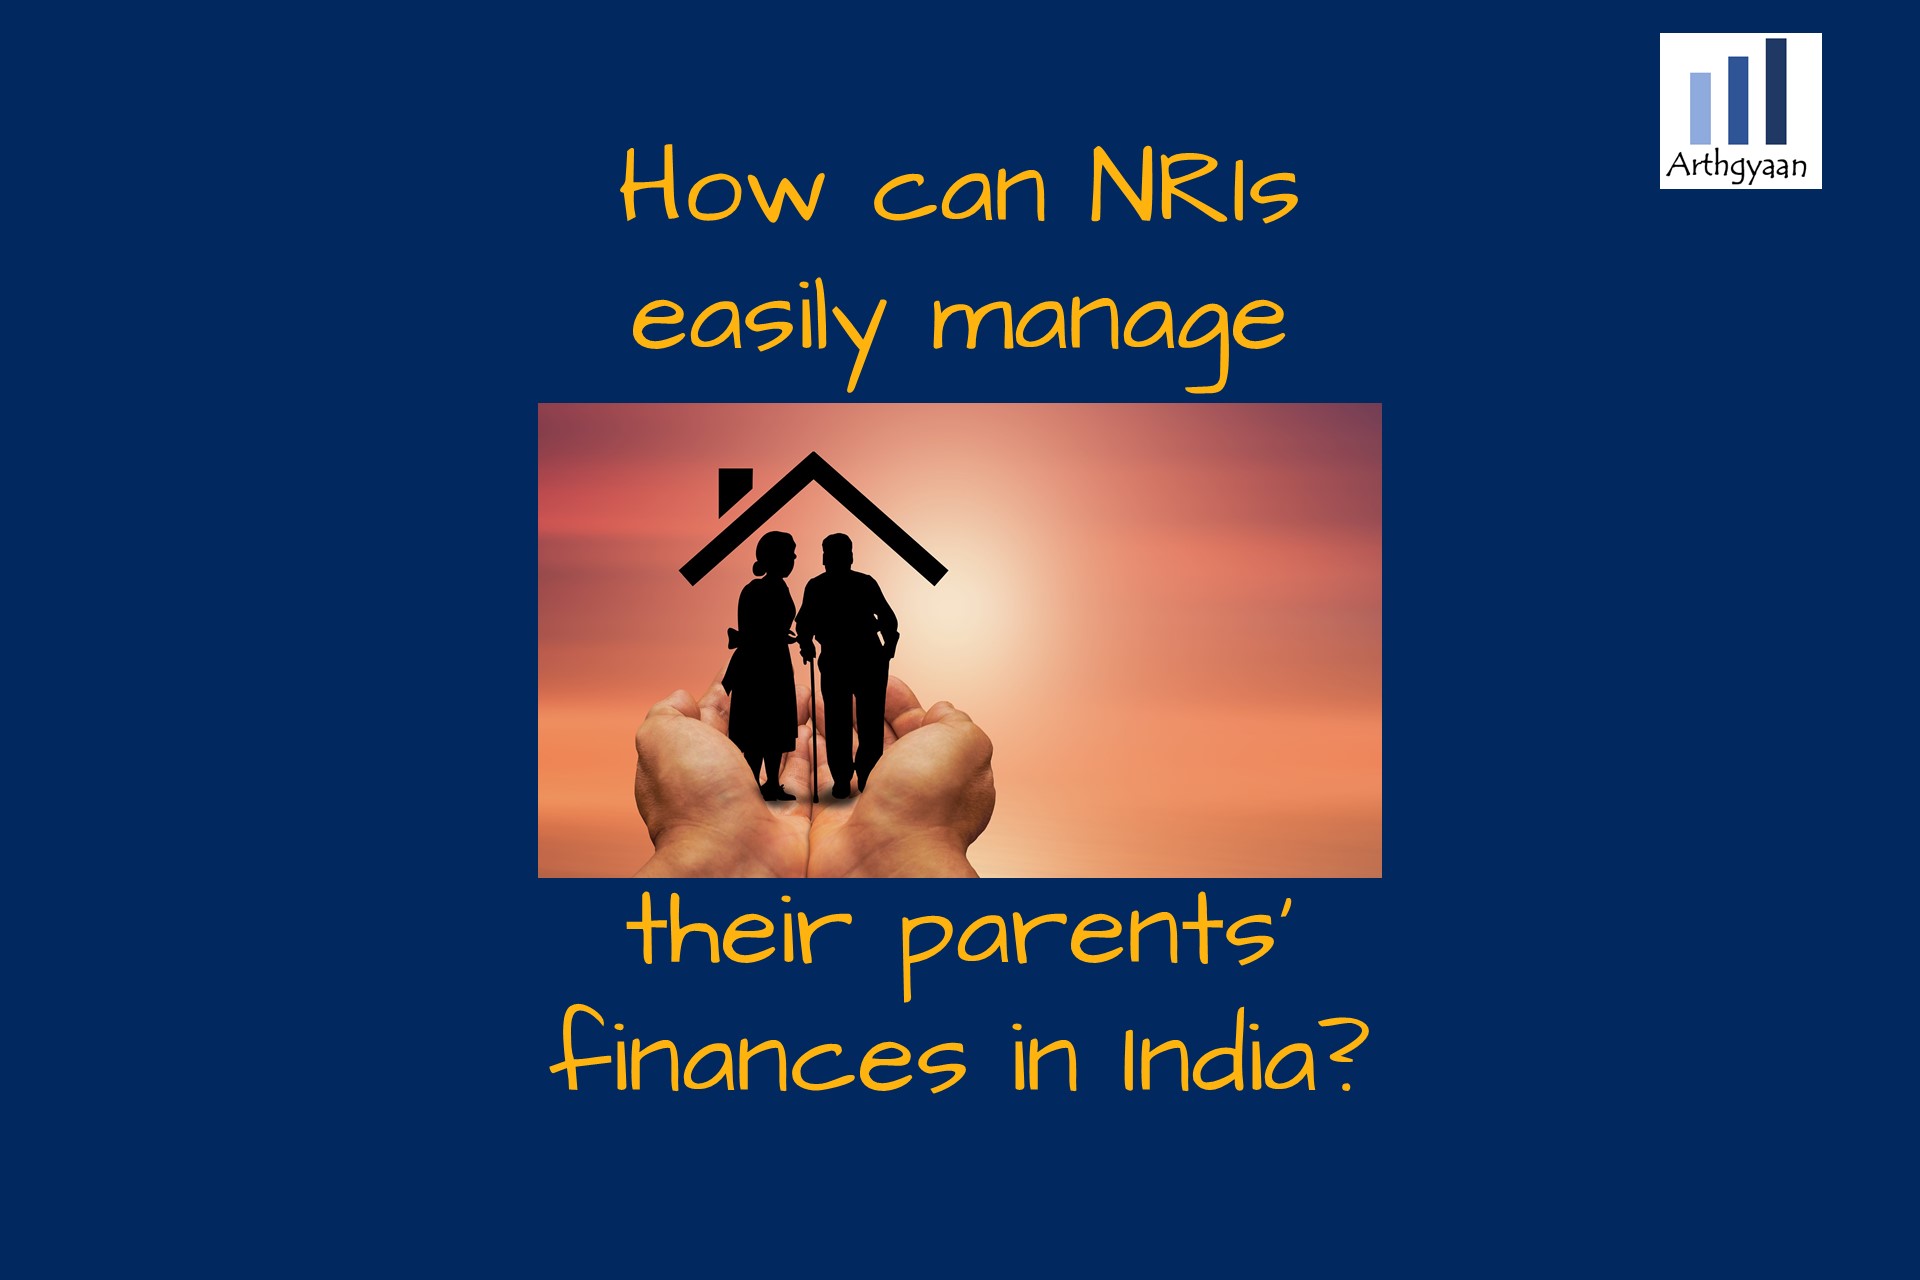 <p>This article shows the steps NRIs can take to easily manage their family’s finances in India.</p>

